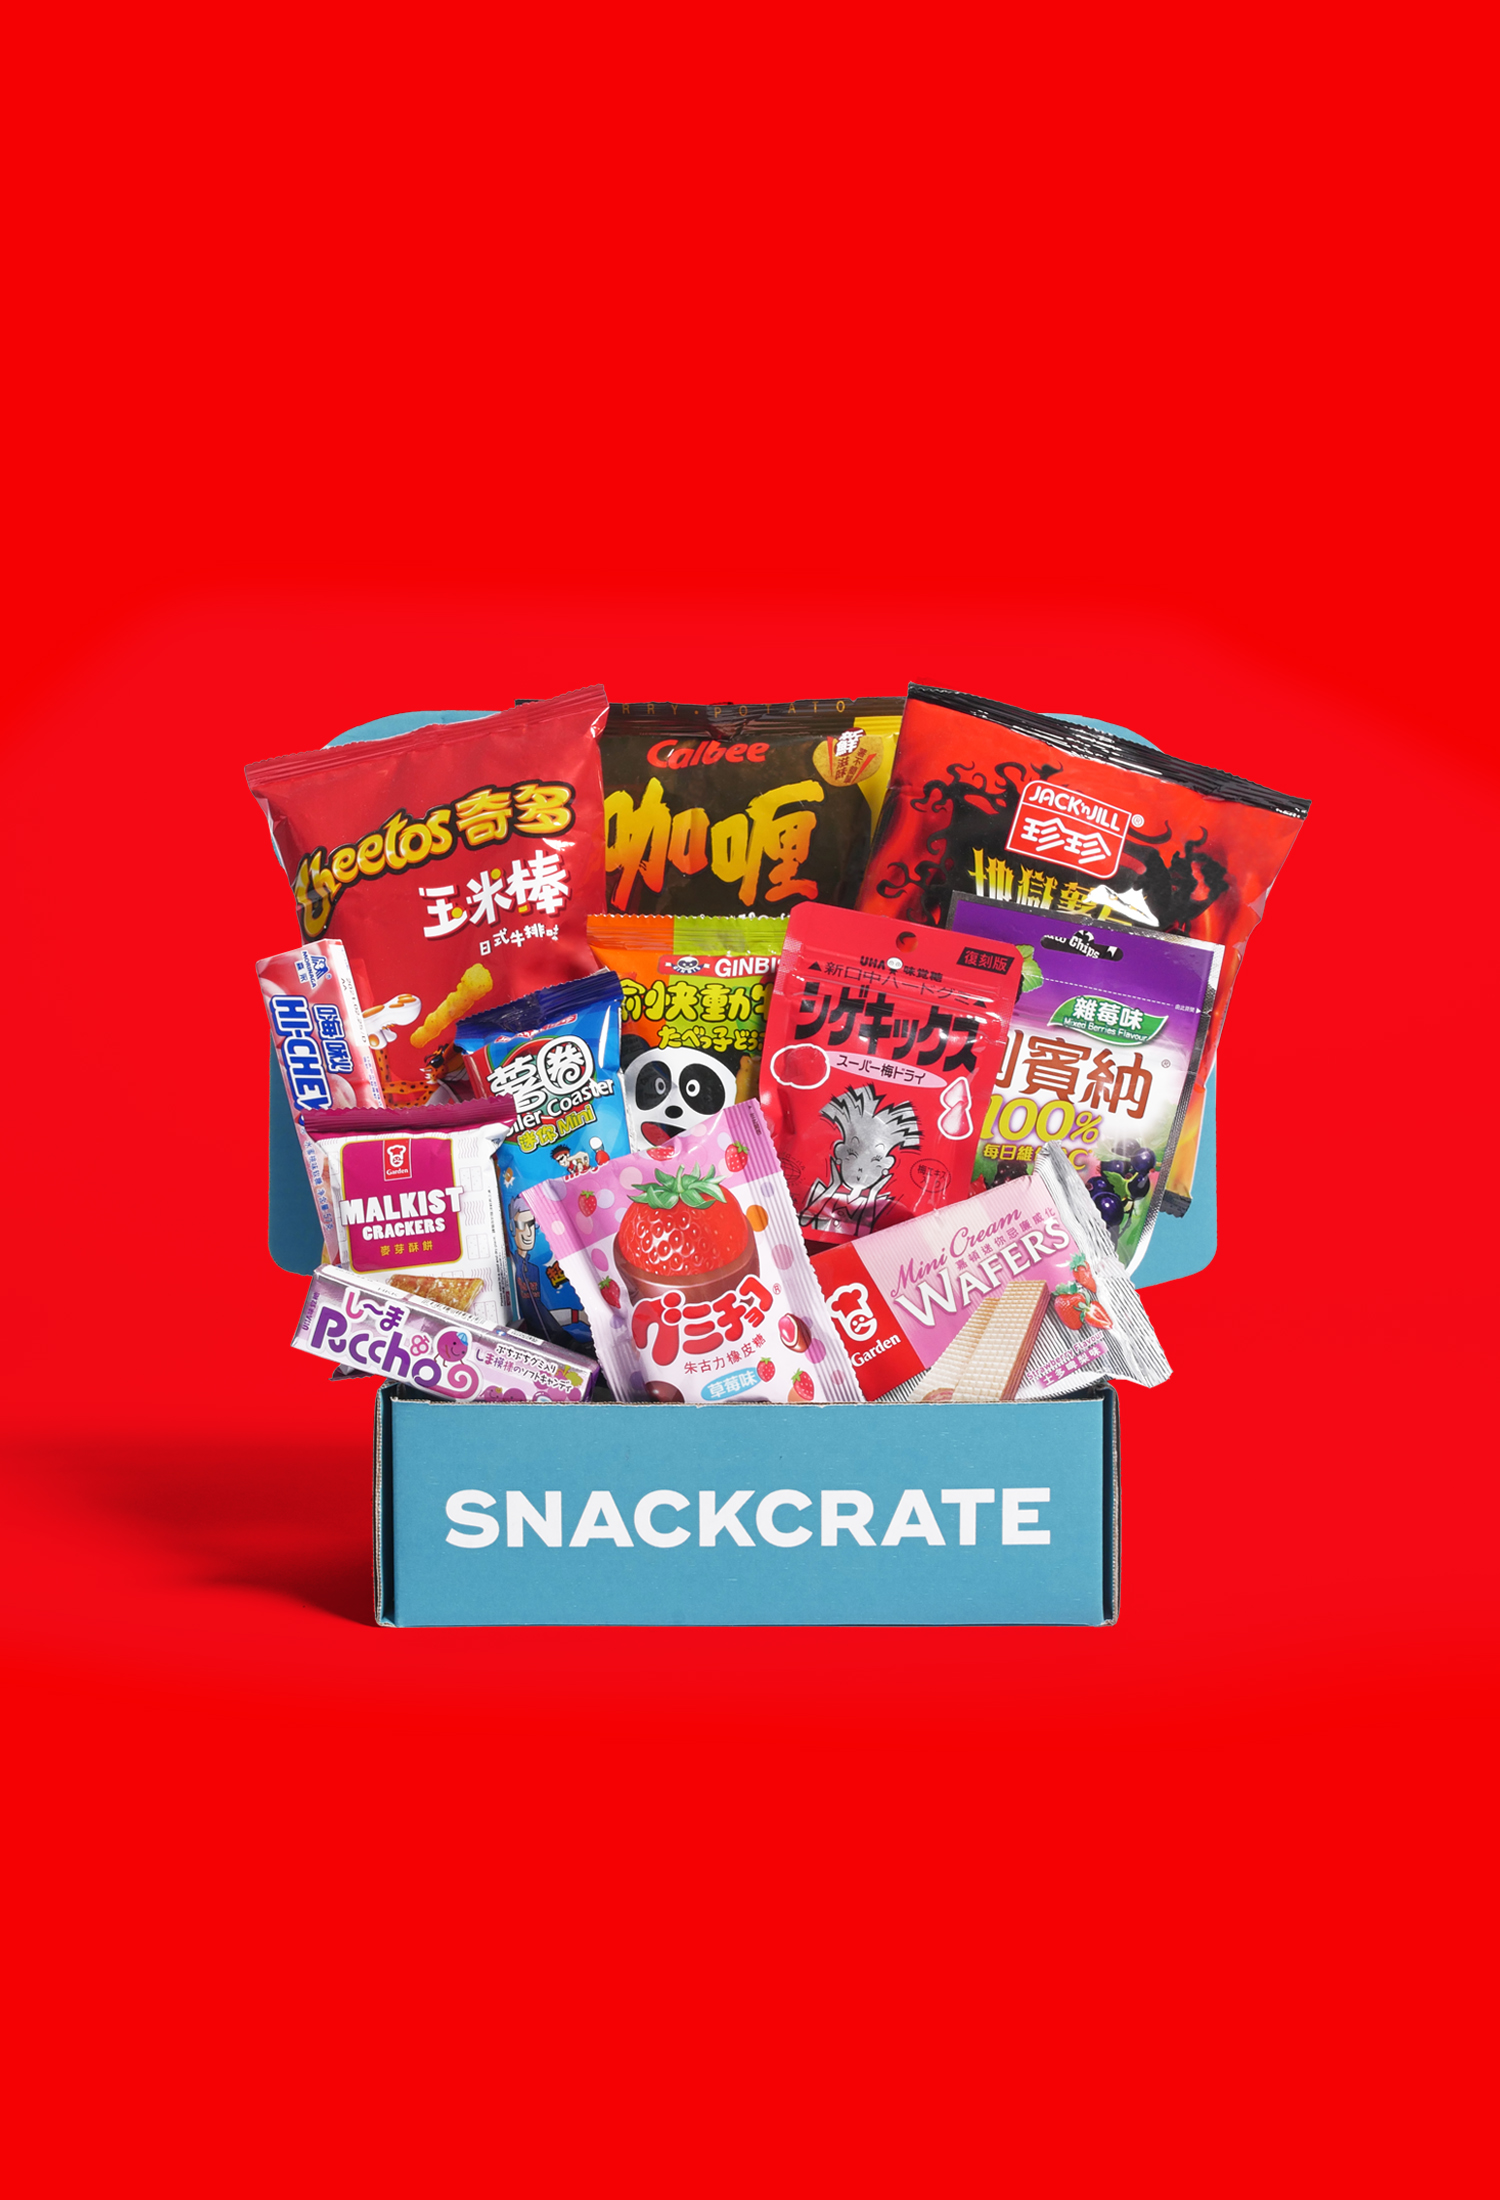 featured country snackcrate full of foreign snacks